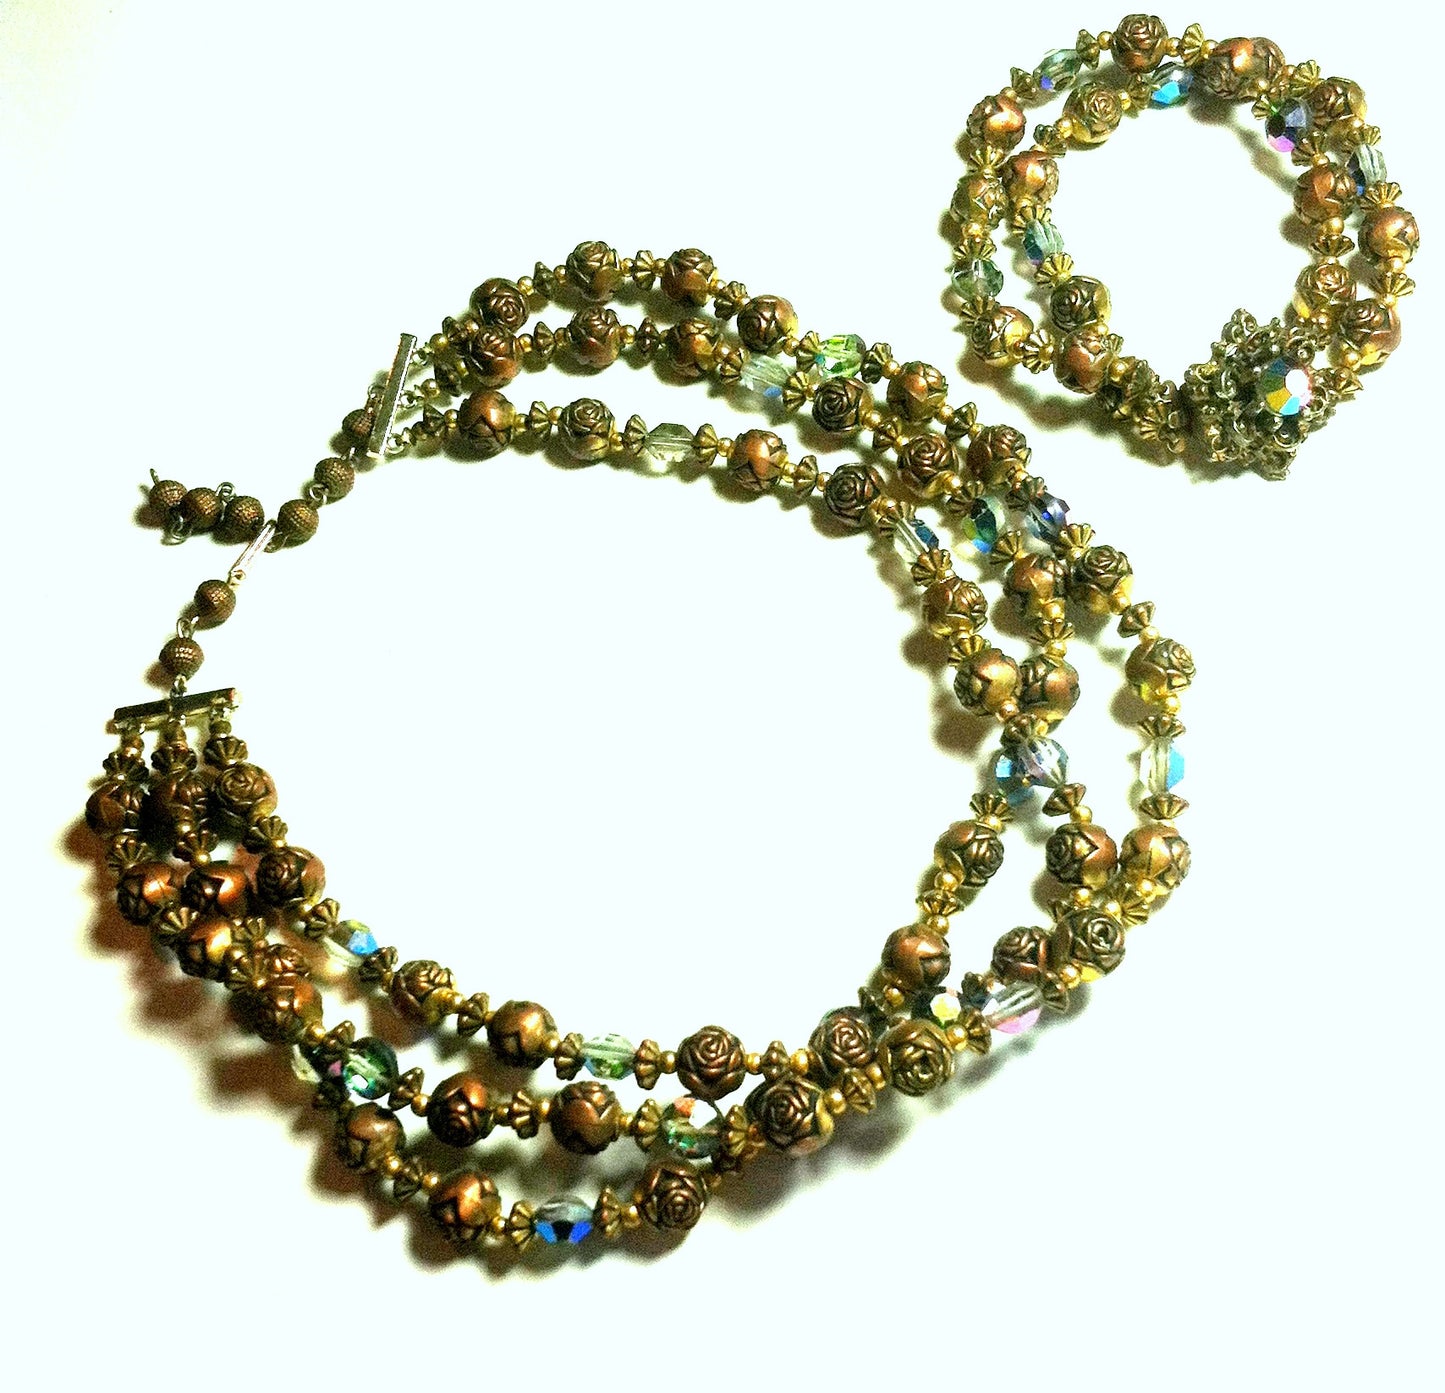 SALE Coppery Rosette Bead and Aurora Borealis Crystal Necklace and Bracelet Set circa 1960s